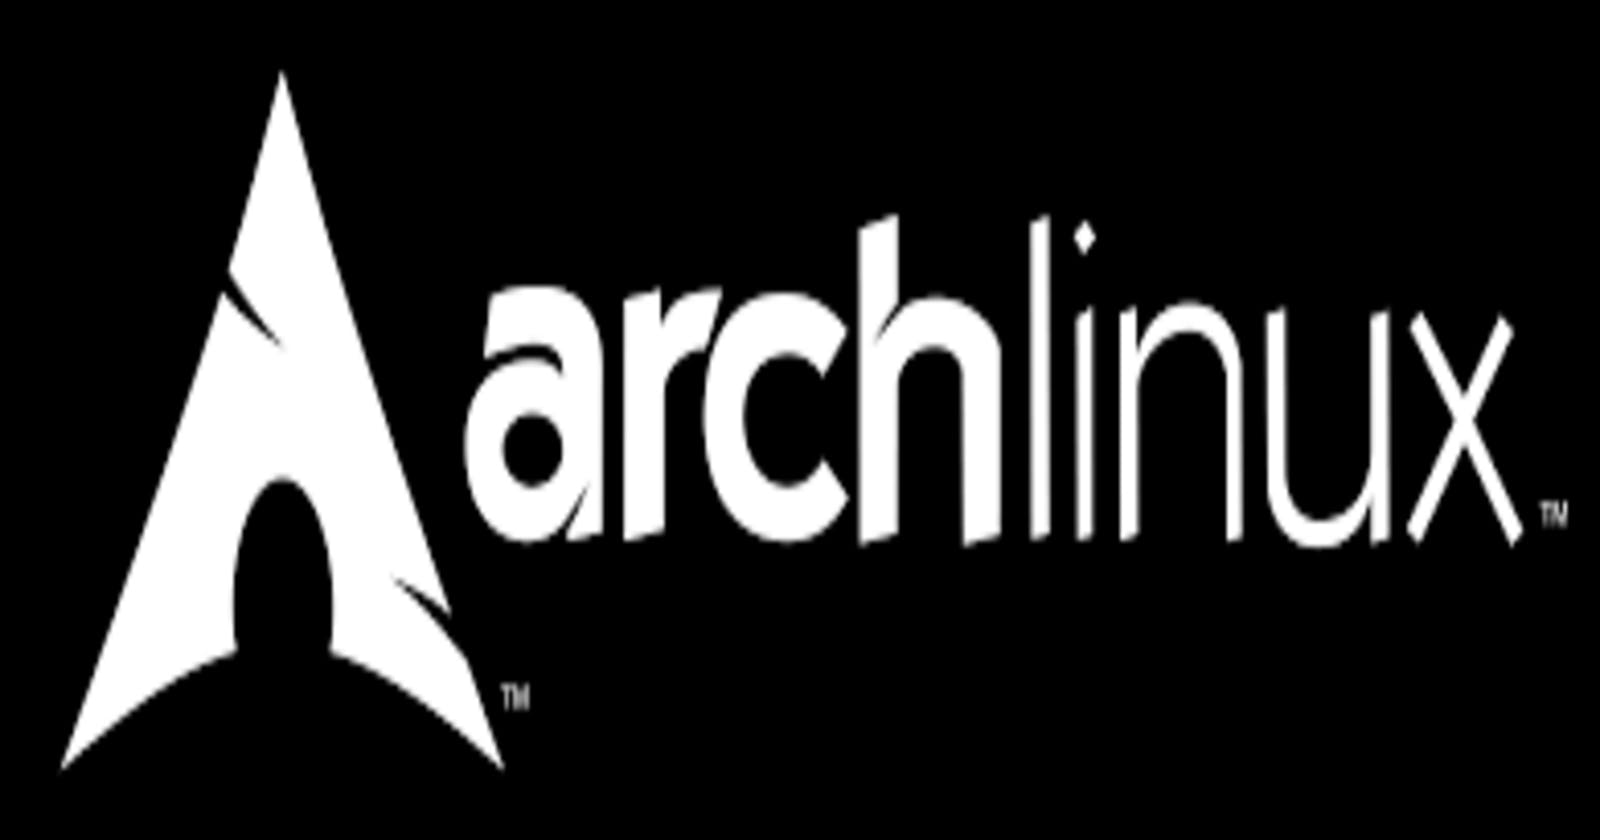 Installing Arch Linux